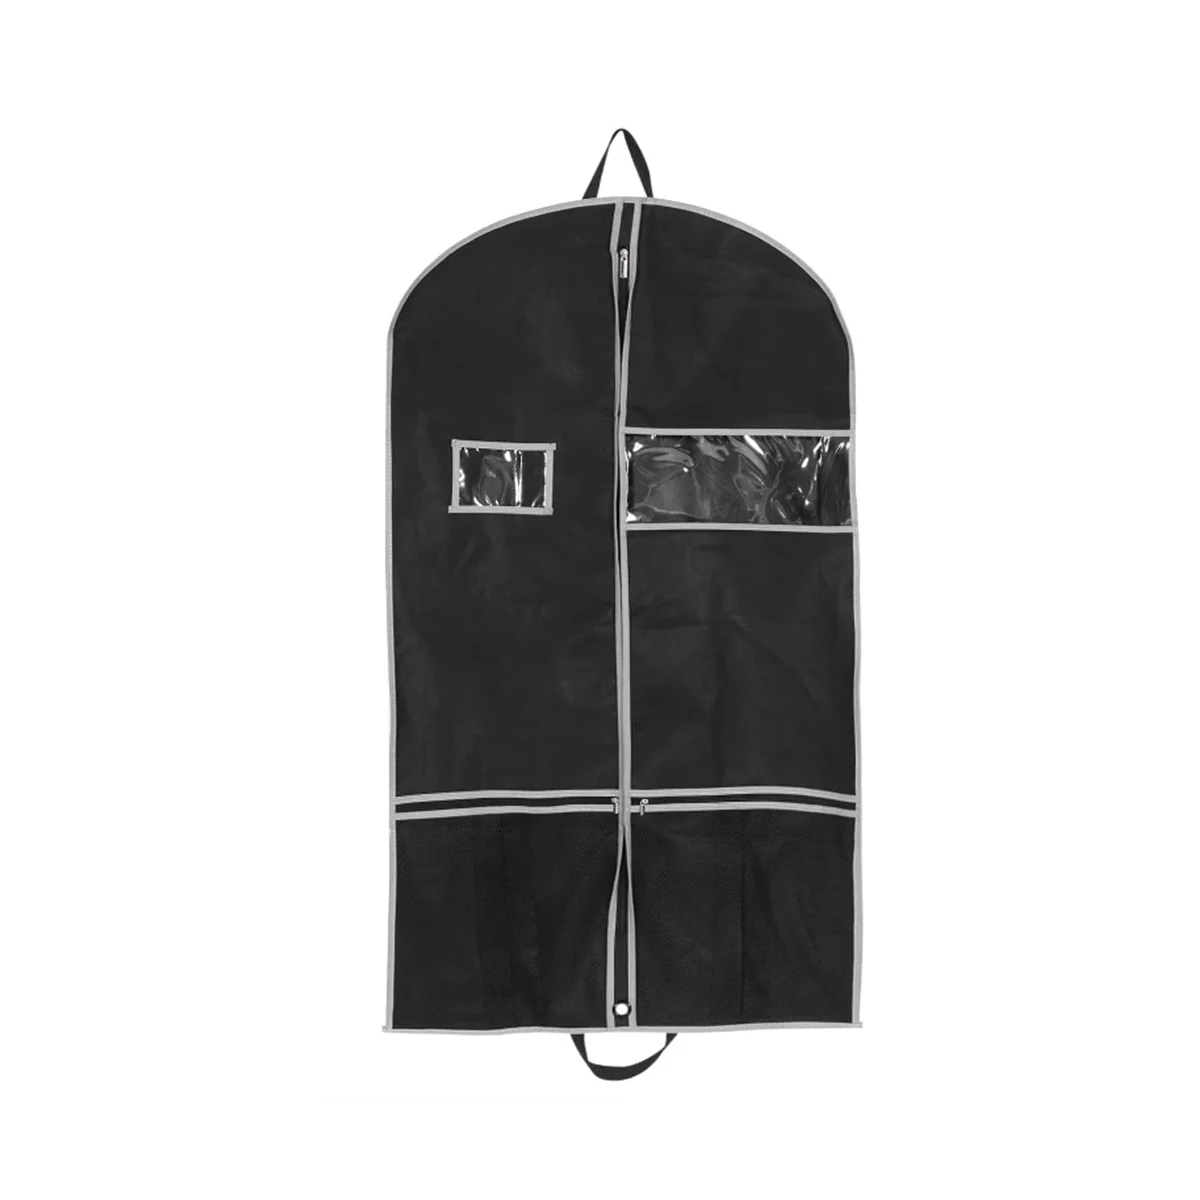 

Suit Bag for Travel, Suit Carrier for Men Breathable Garment Bag with 2 Mesh Pockets and 1 PVC Pocket for Travel Closet